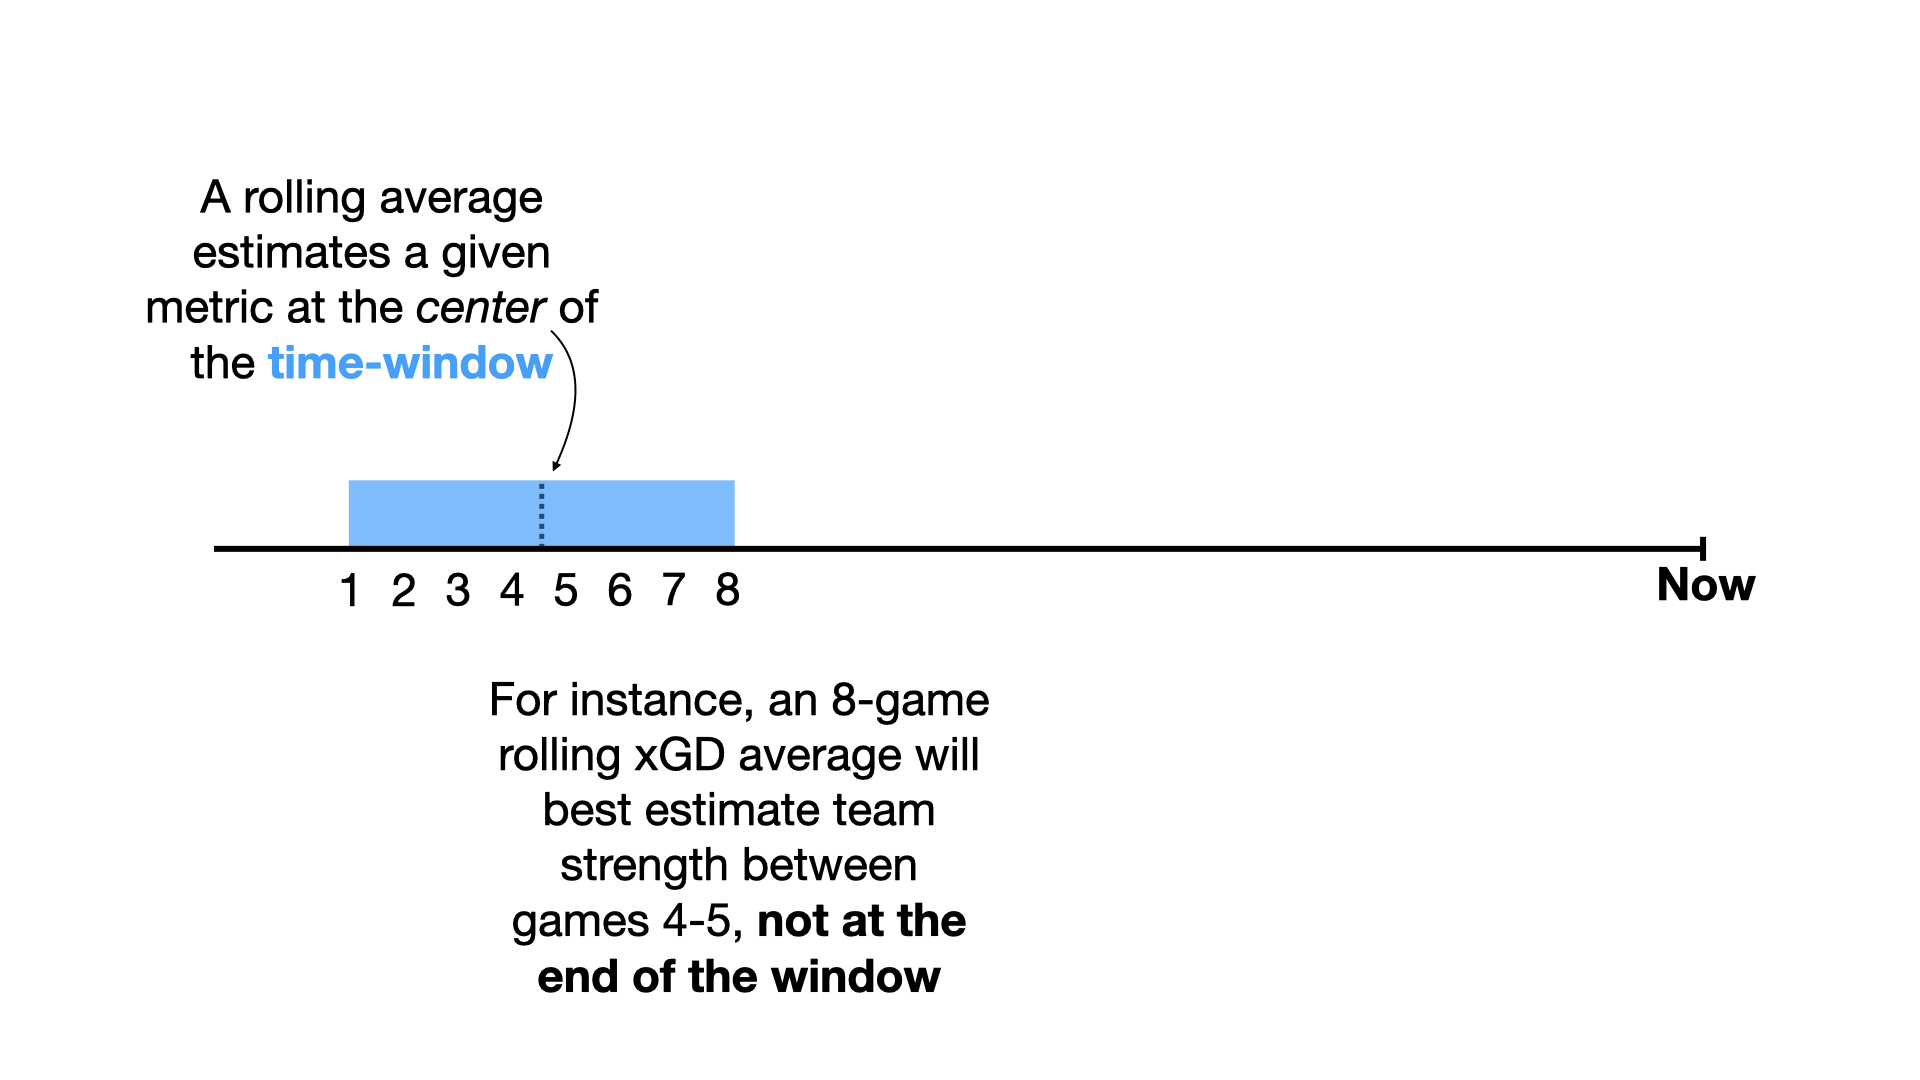 A rolling average estimates a given metric at the center of the time-window. For instance, an 8-game rolling xGD average will best estimate team strength between games 4-5, not at the end of the window.